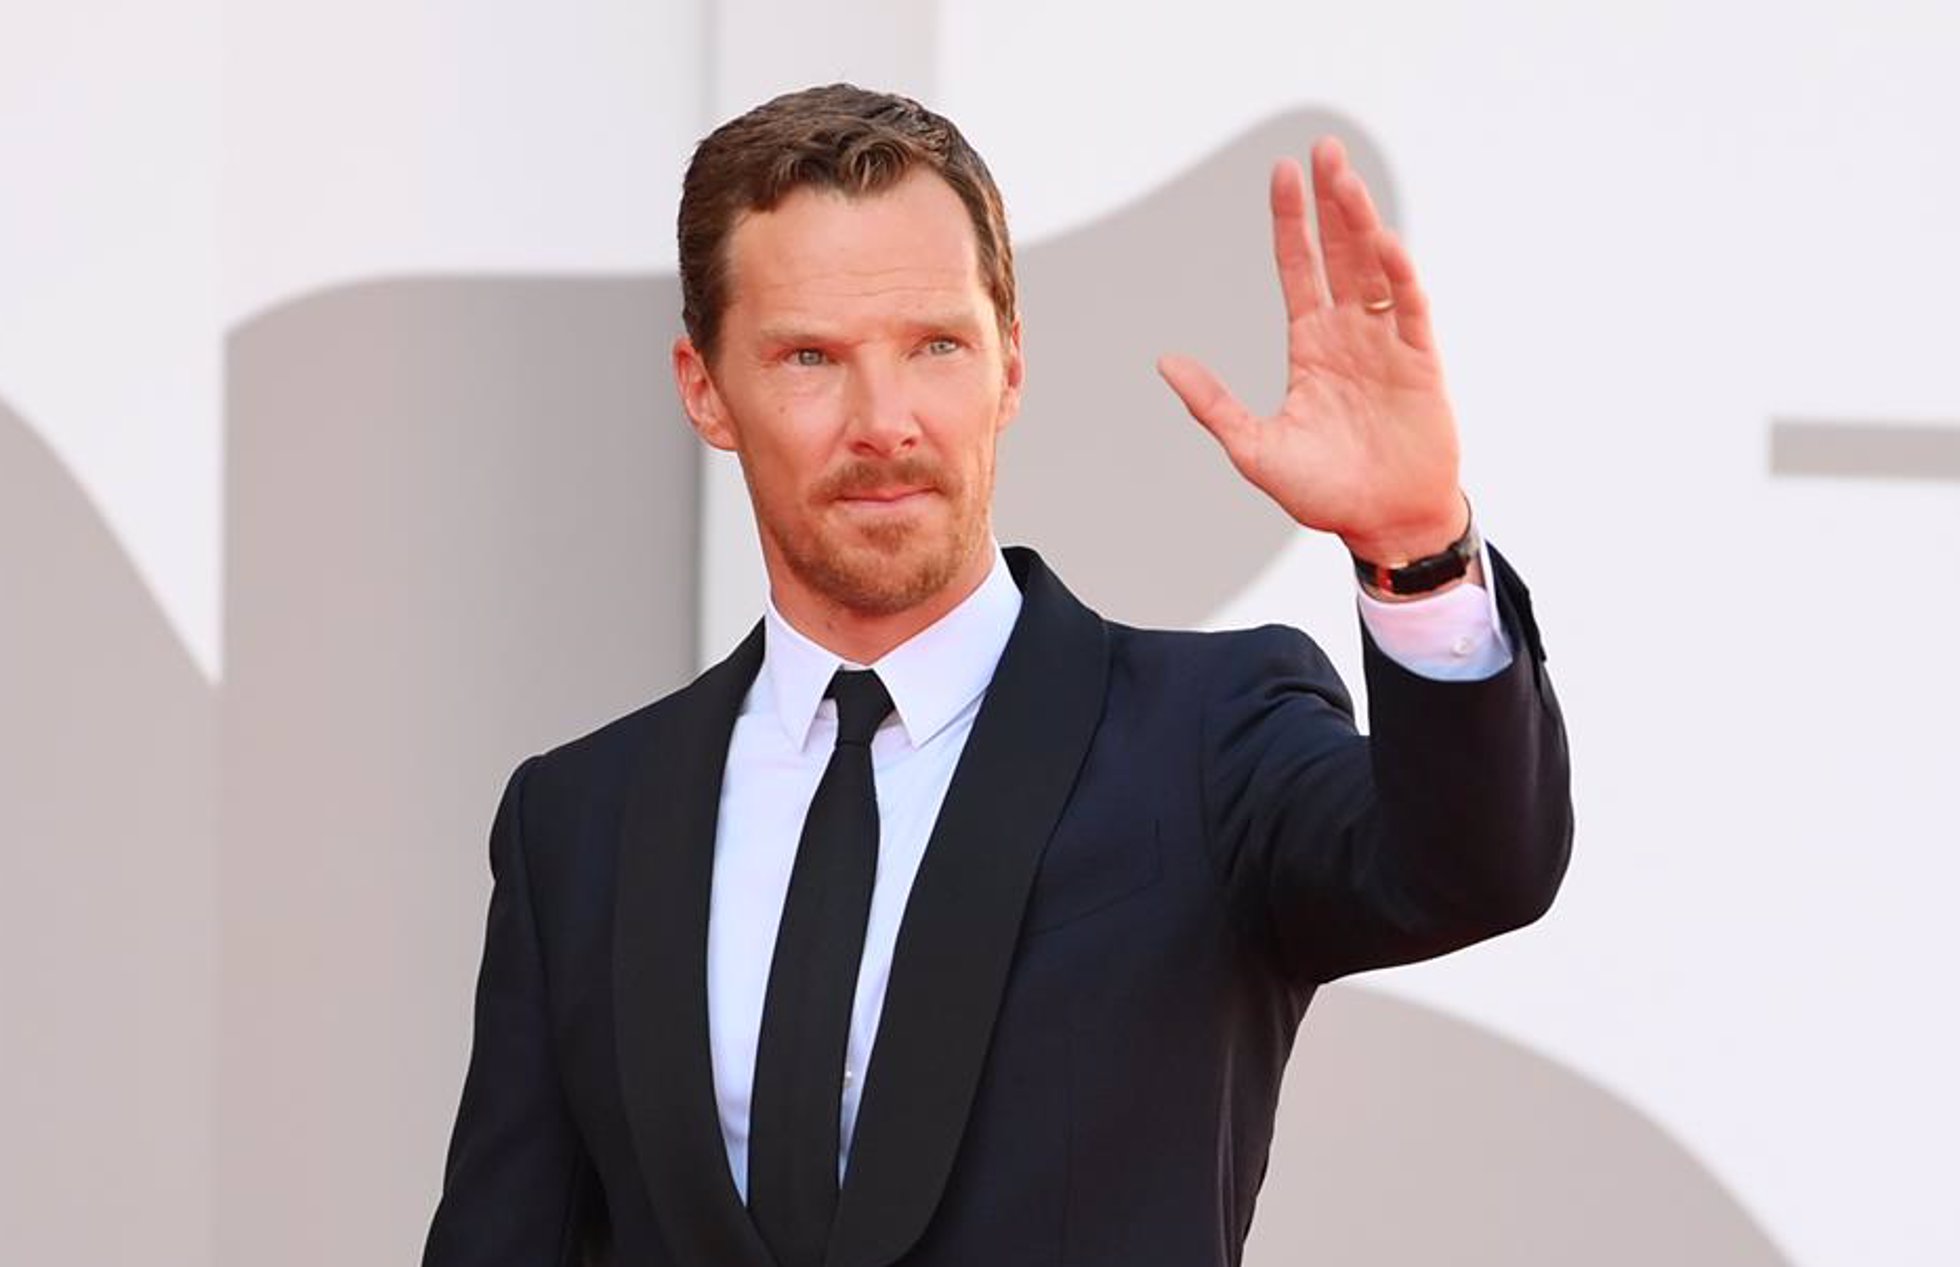 Archivo - 02 September 2021, Italy, Venice: English actor Benedict Cumberbatch arrives to attend the premiere of 'The Power of the Dog' during the 78th edition of the Venice Film Festival. Photo: Gian Mattia D'alberto/LaPresse via ZUMA Press/dpa